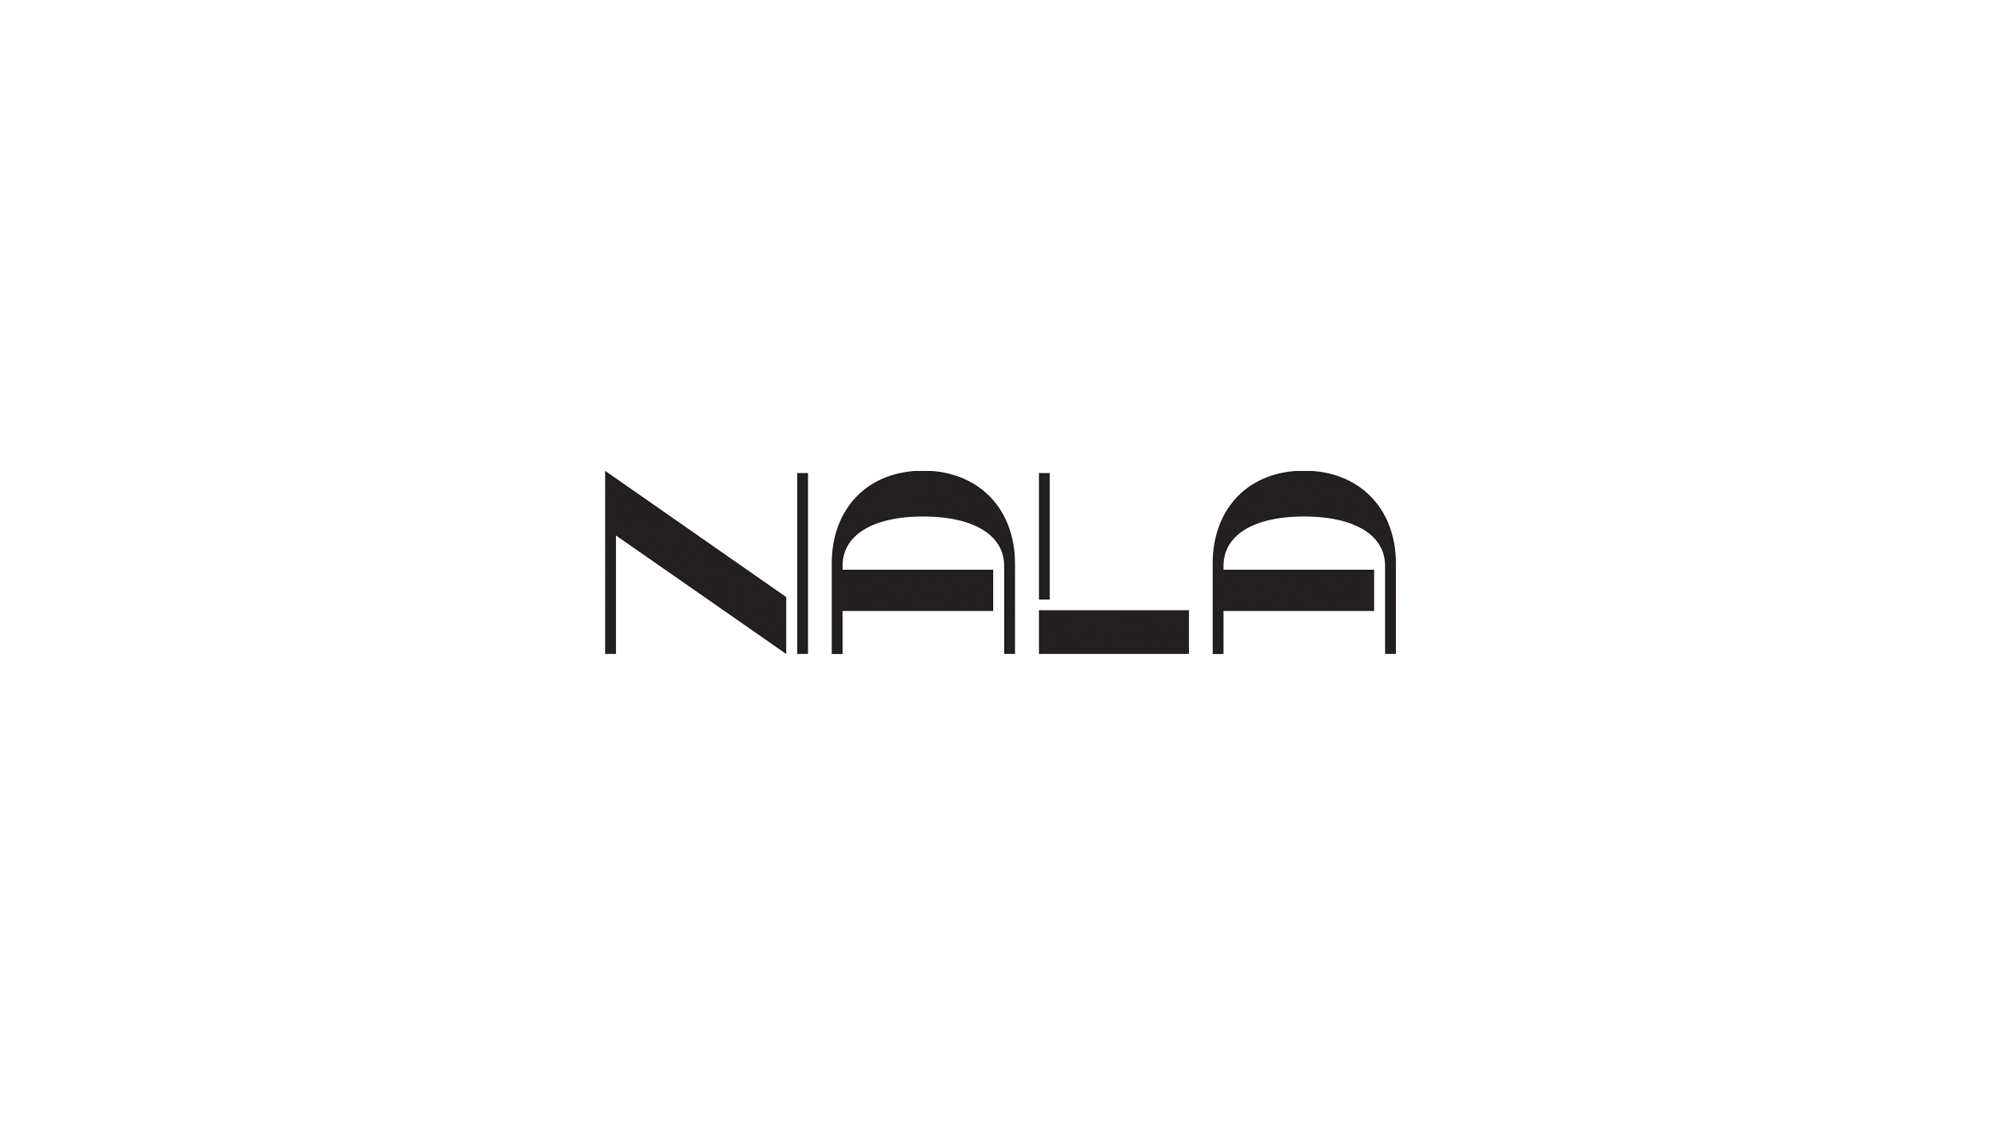 Brand New: New Logo, Identity, and Packaging for Nala by Universal